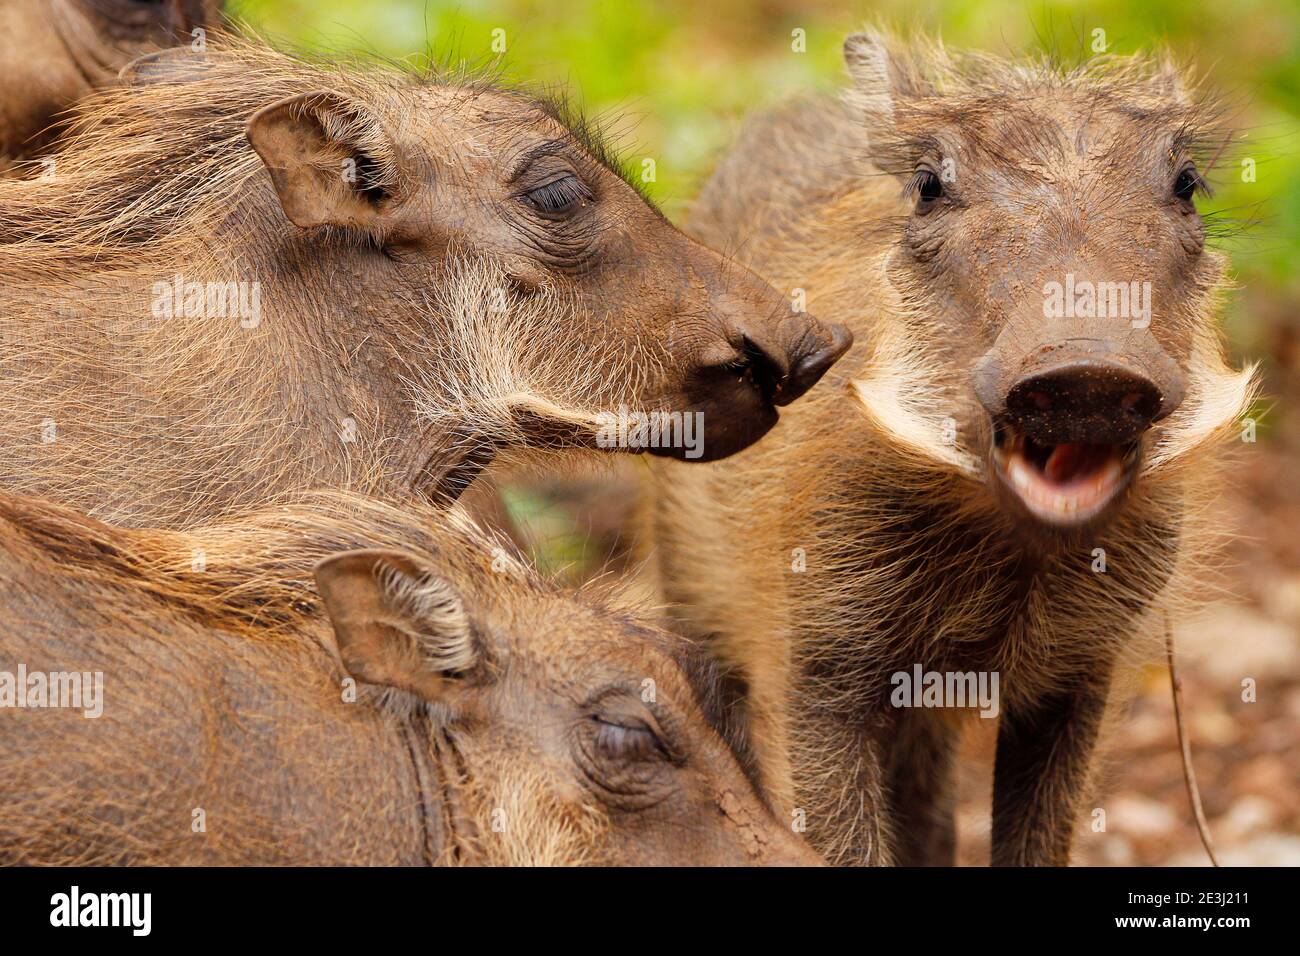 A family of warthogs in the Kruger Park. Stock Photo